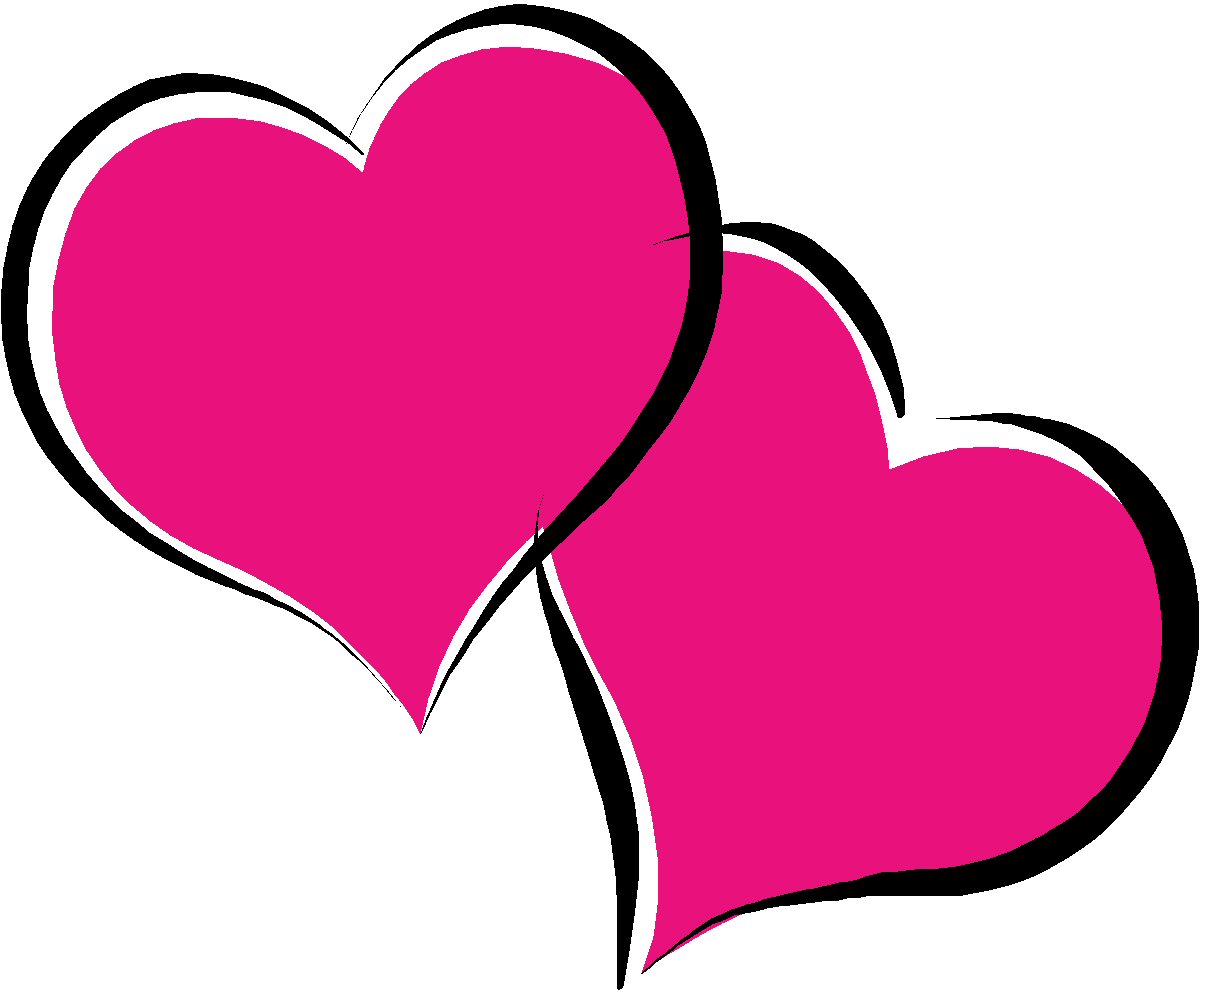 Pink Heart Free PPT Backgrounds for your PowerPoint Templates